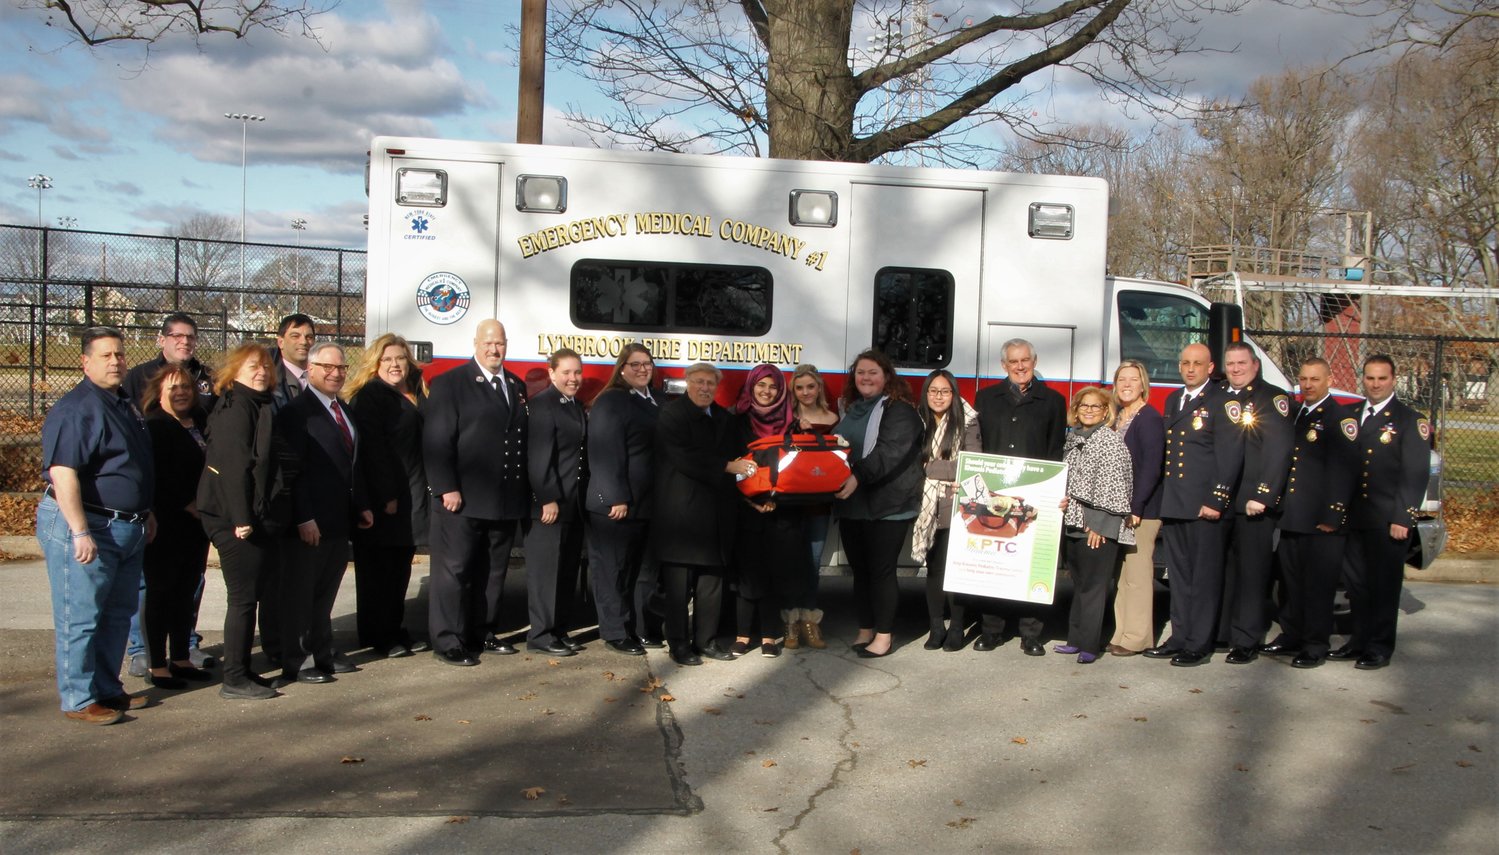 The Lynbrook Kiwanis Club’s Circle K representatives recently donated an emergency kit to the Lynbrook Fire Department.